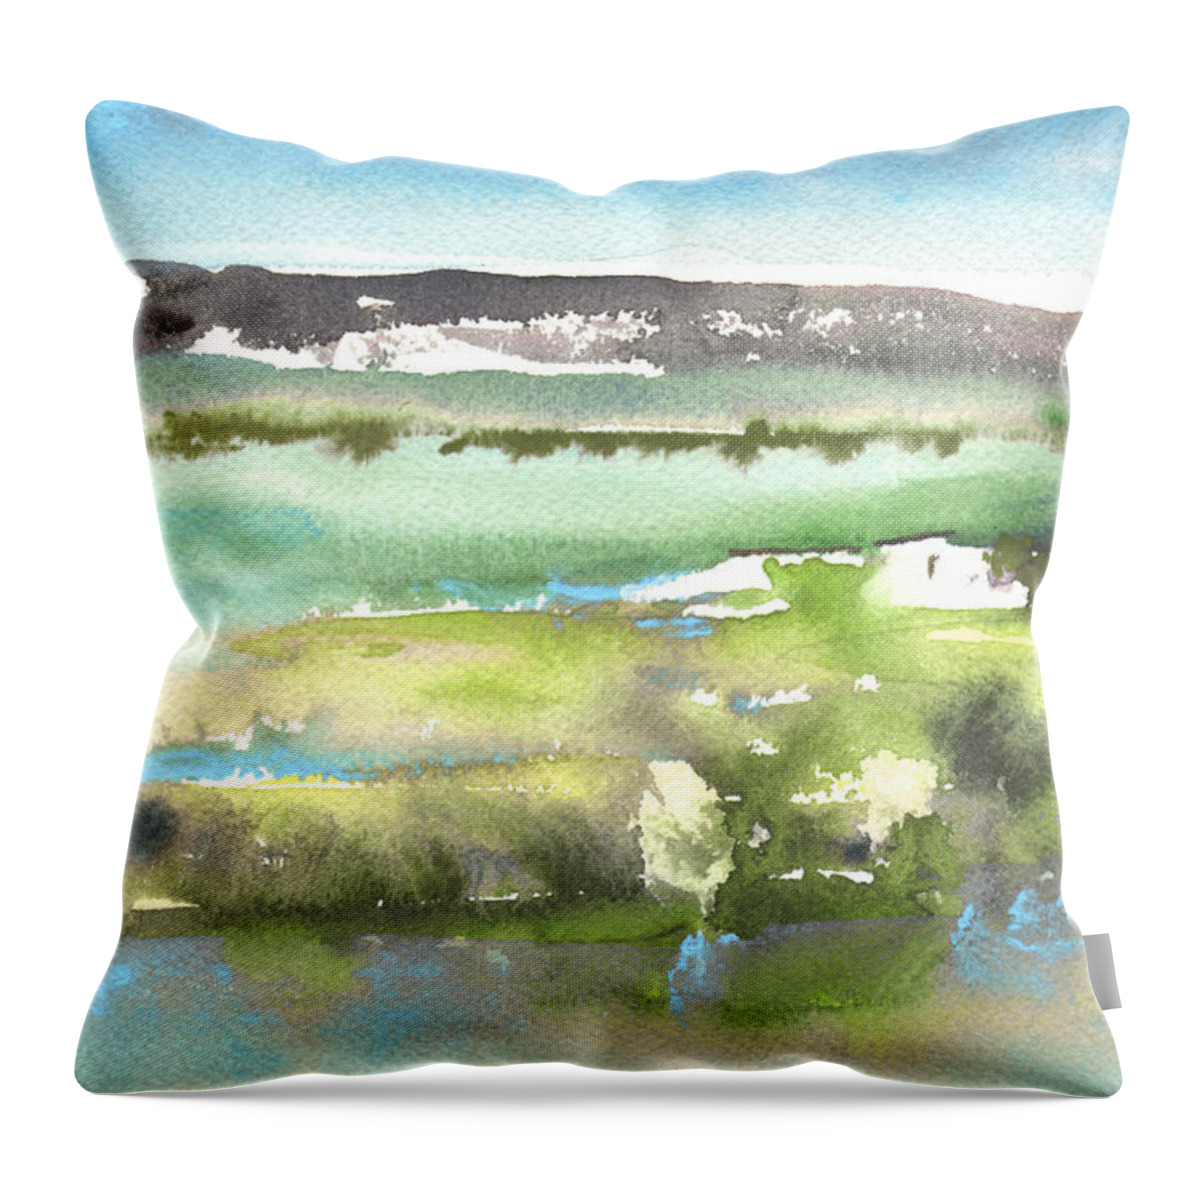 Travel Throw Pillow featuring the painting Lagoon In Spain by Miki De Goodaboom